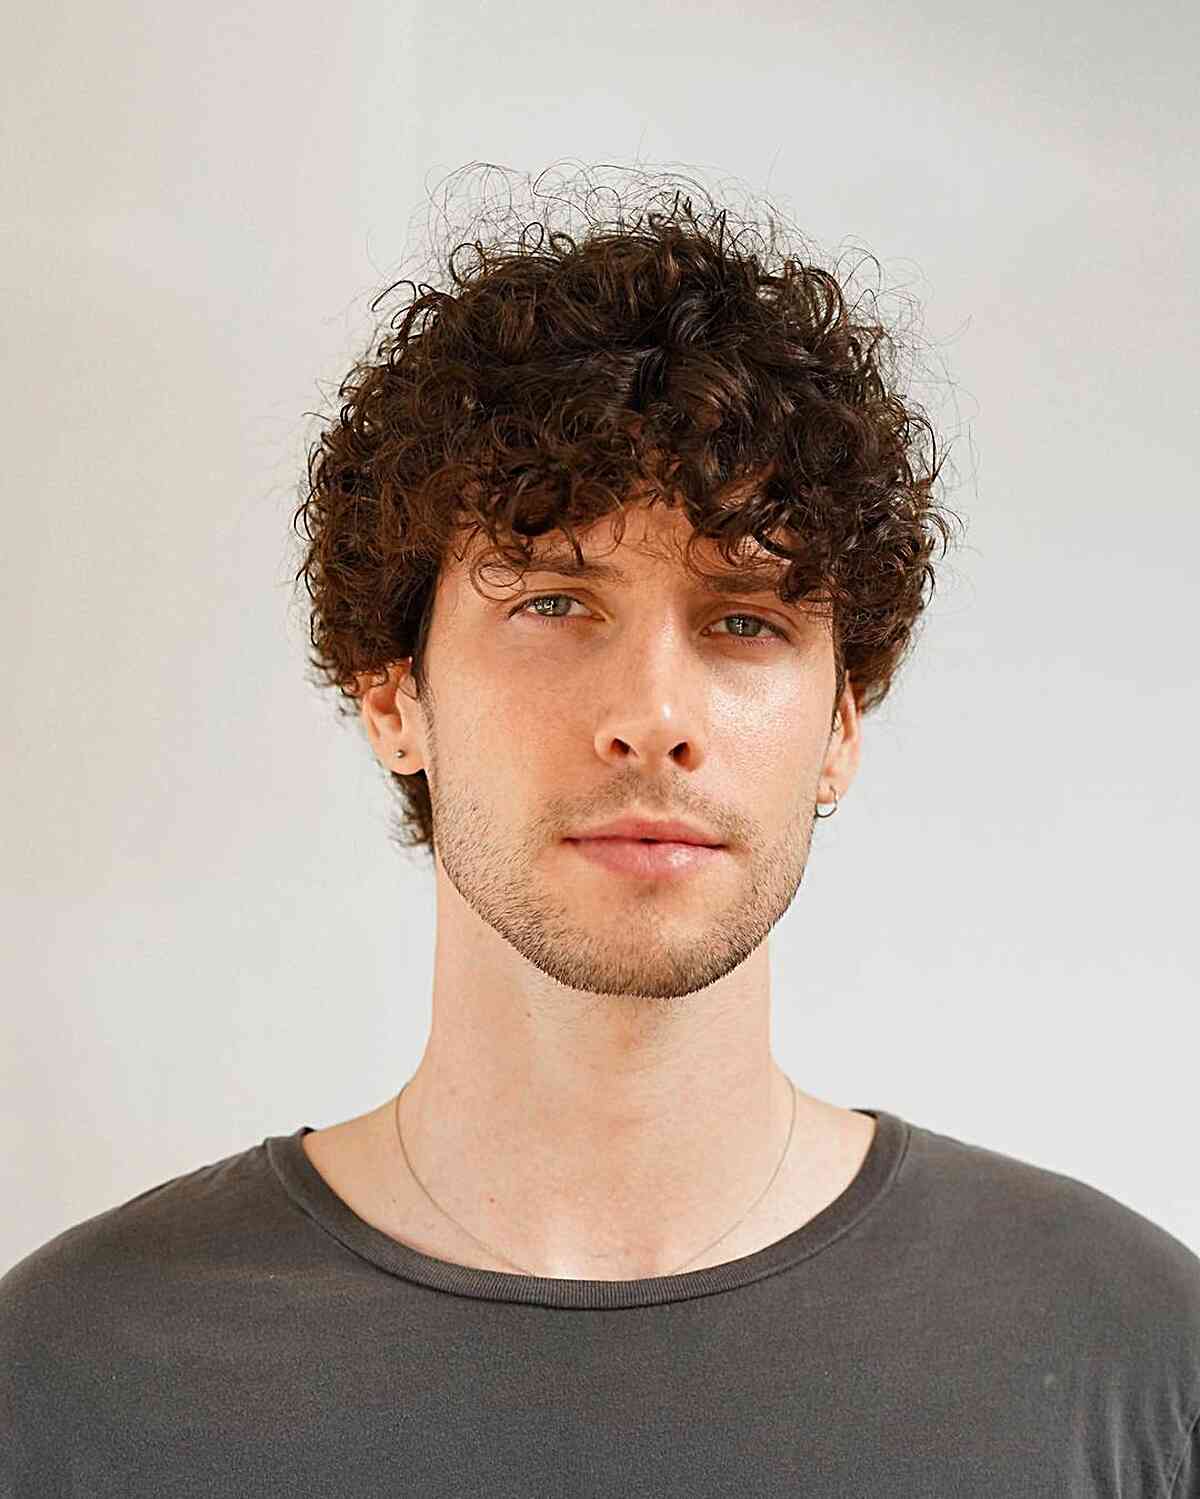 What are the best haircuts for curly-haired men in a business environment?  - Quora